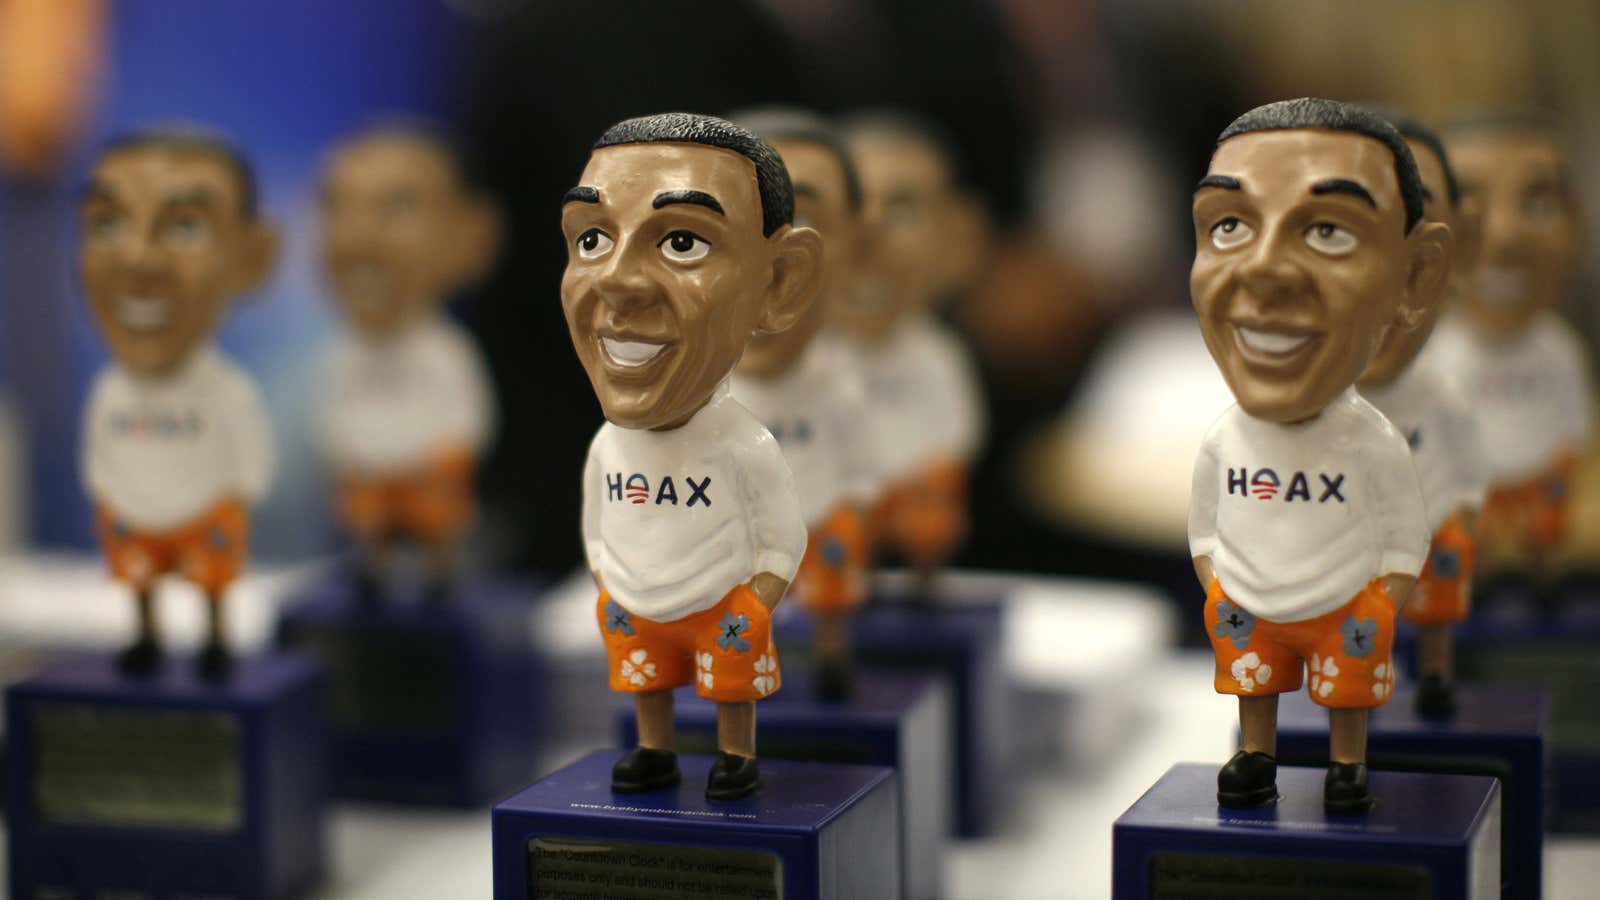 Figures of President Barack Obama with the word “Hoax” are on display at the Conservative Political Action conference (CPAC) in Washington February 10, 2011. REUTERS/Kevin…